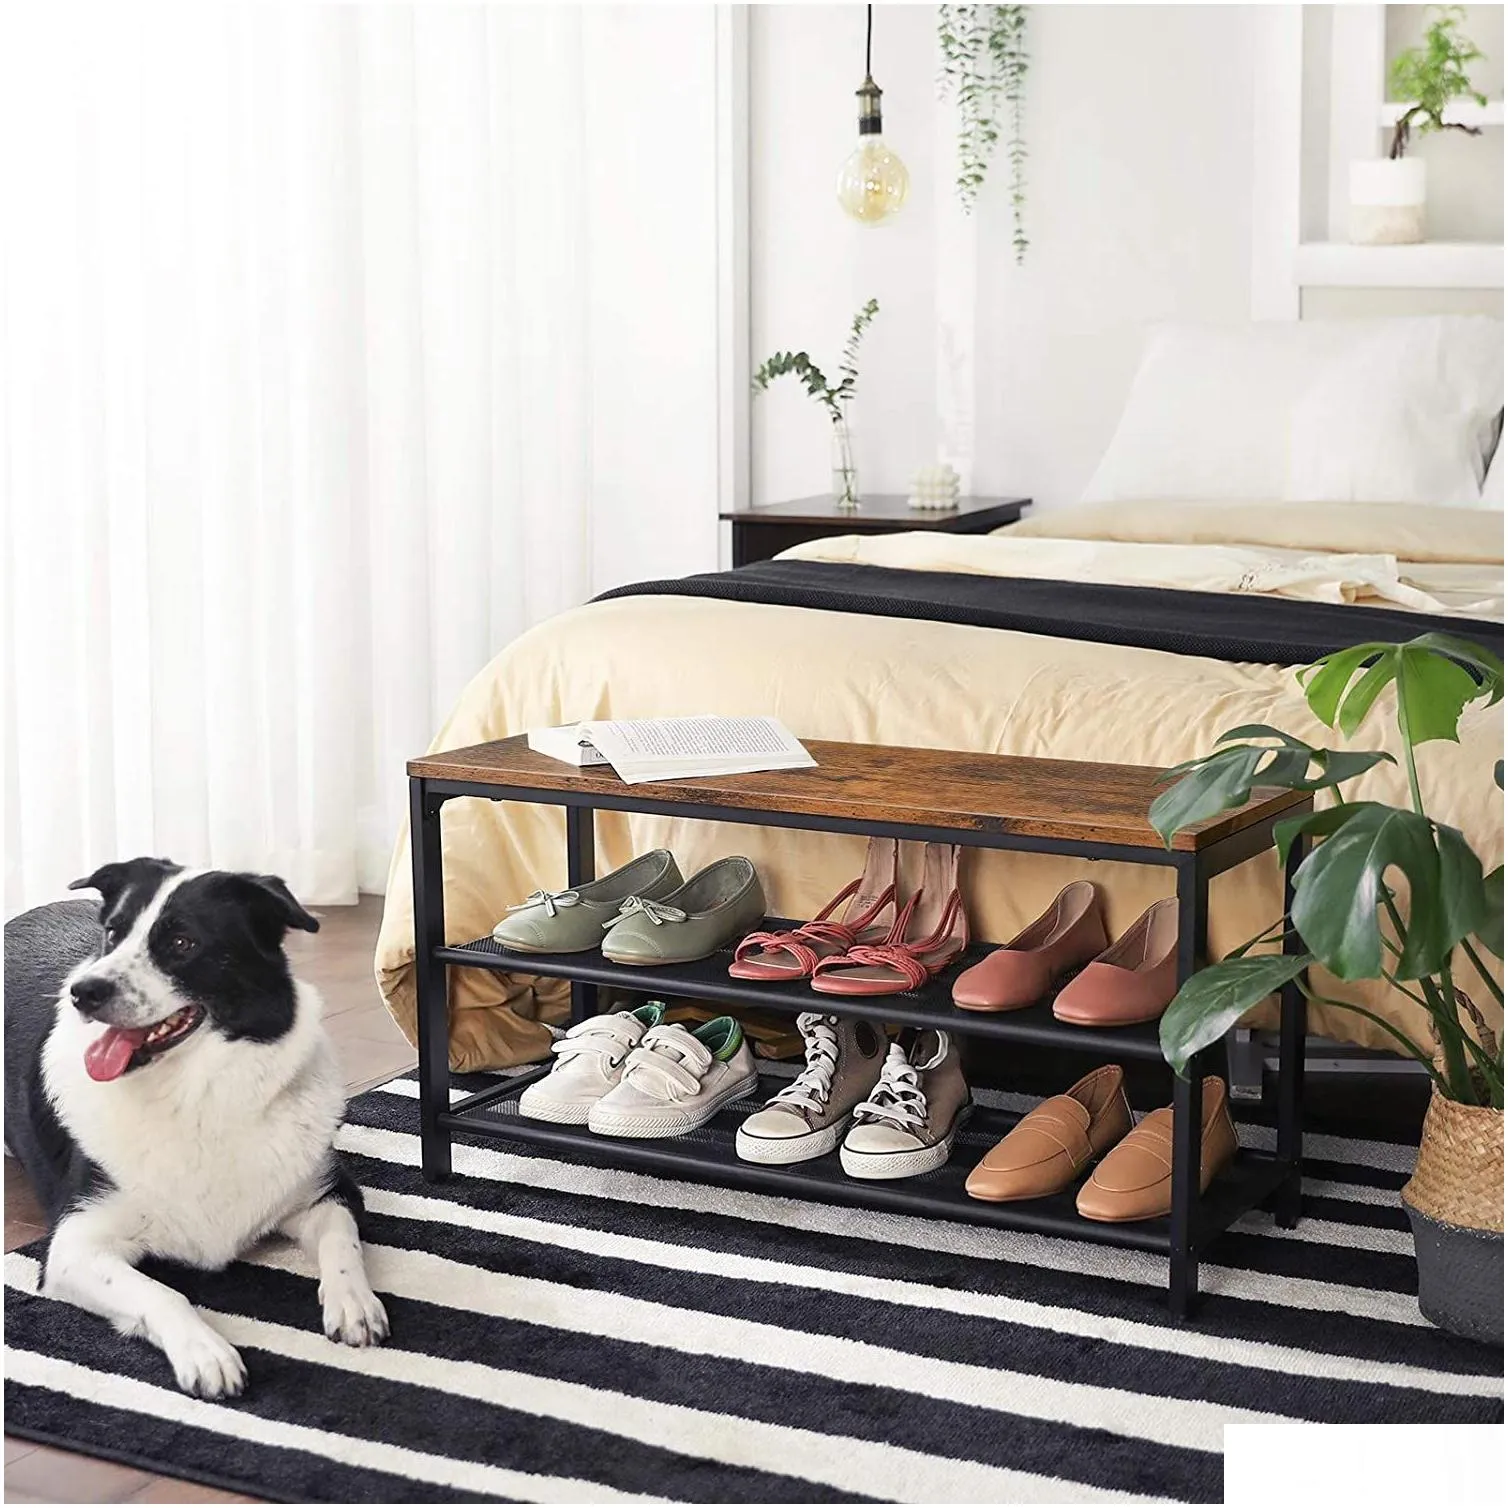 Shoe Bench Shoe Rack with 2 Mesh Shelves Shoe Storage Organizer for Entryway Hall Metal2264100